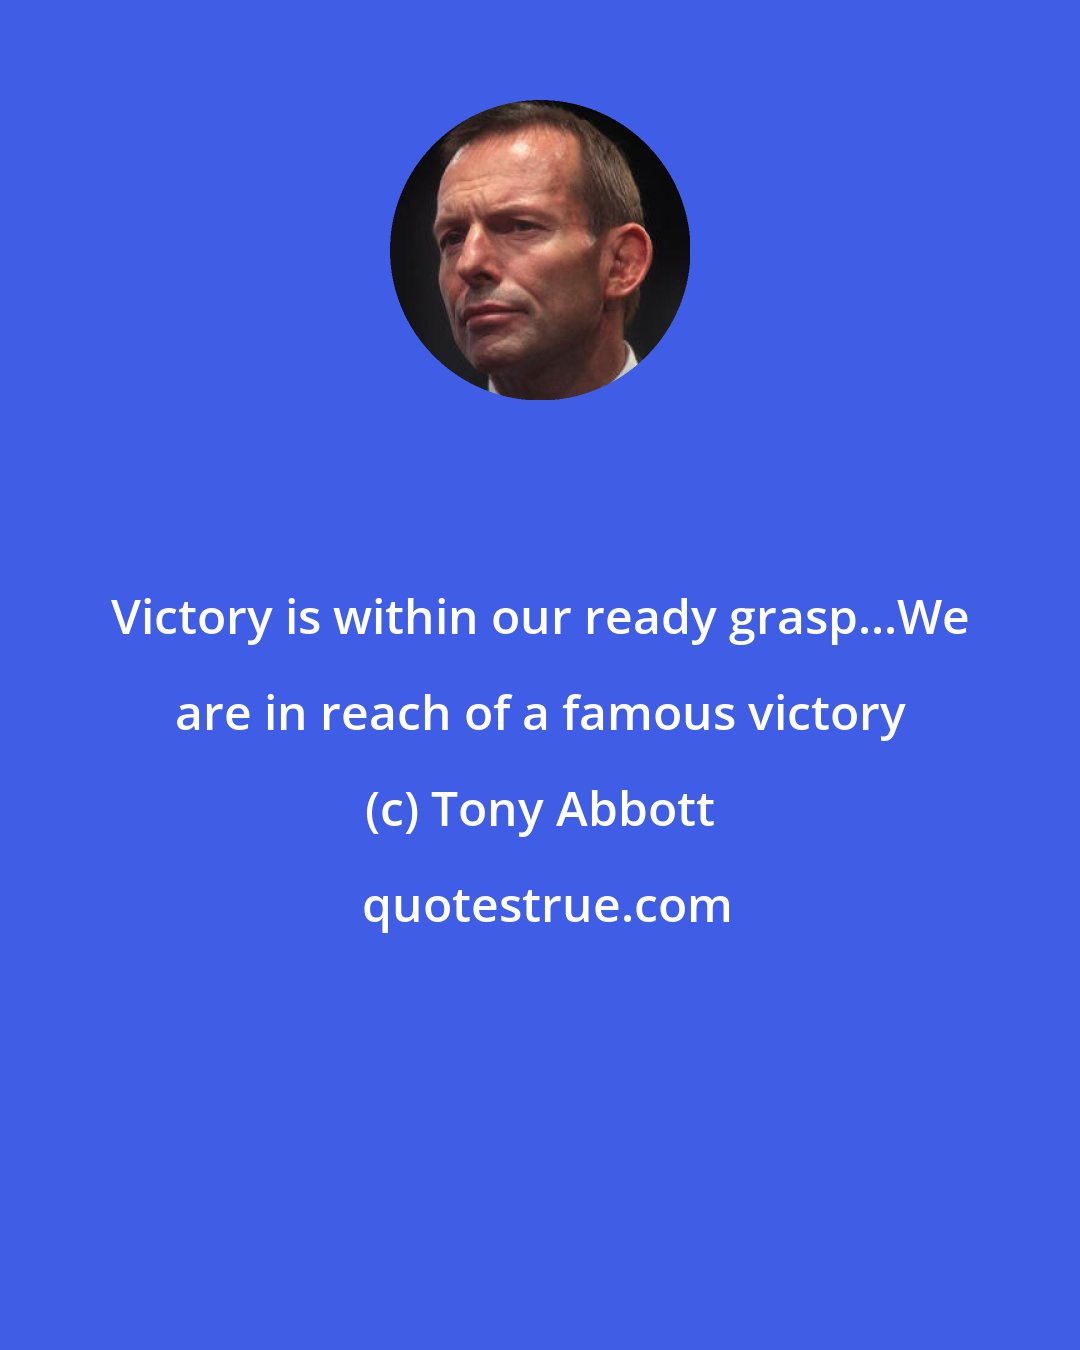 Tony Abbott: Victory is within our ready grasp...We are in reach of a famous victory